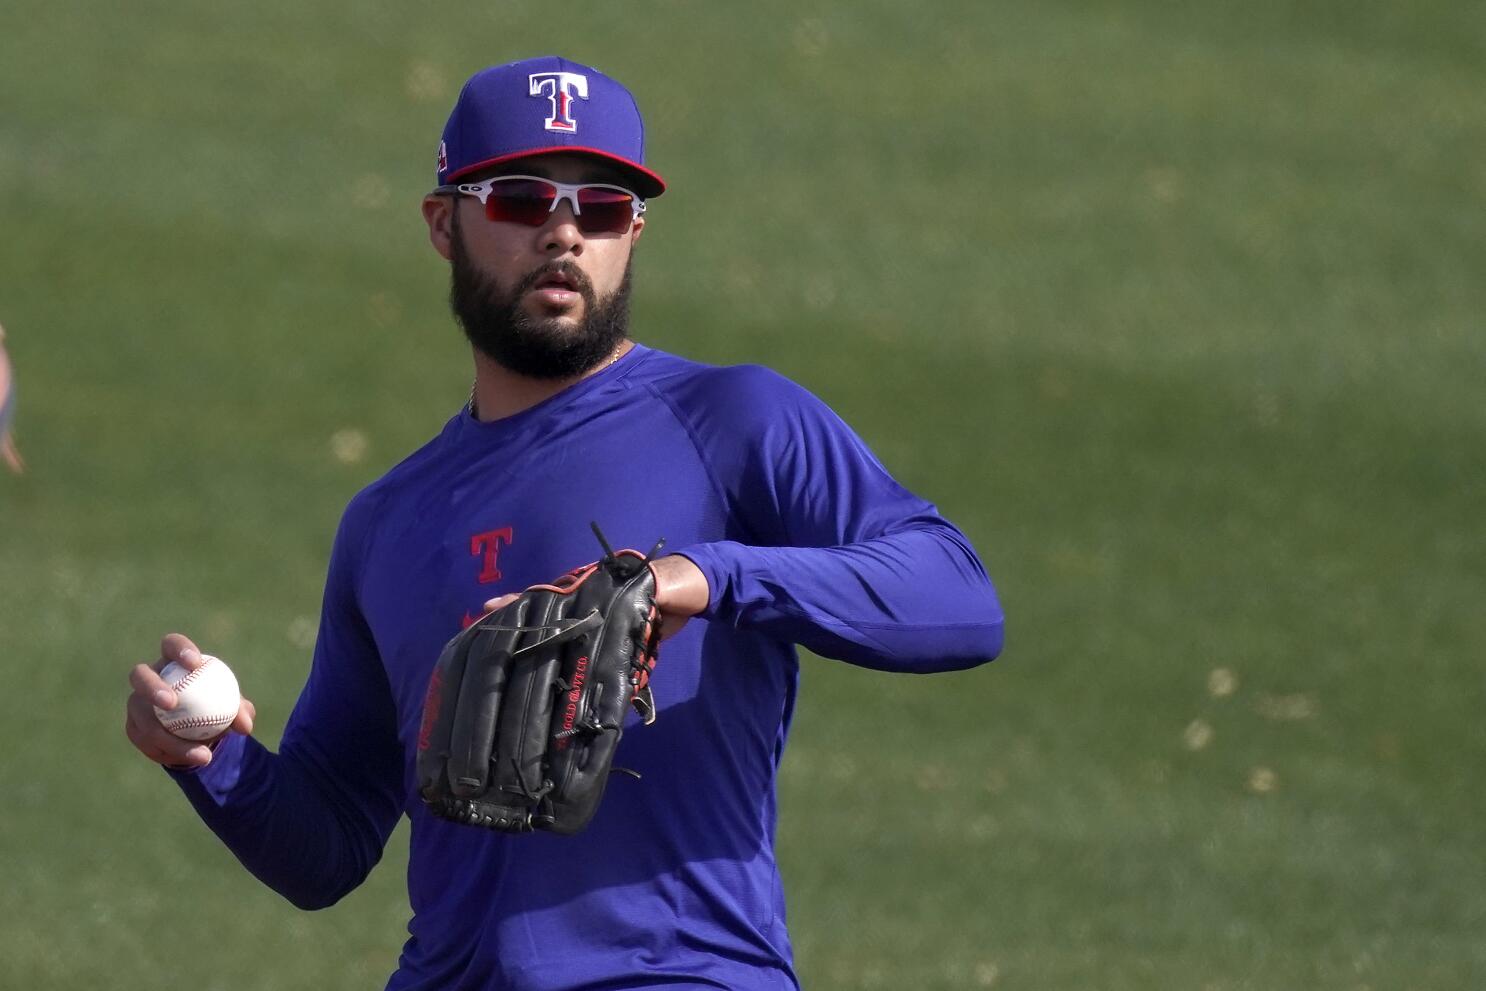 Kiner-Falefa not faking confidence as new Texas starting SS - The